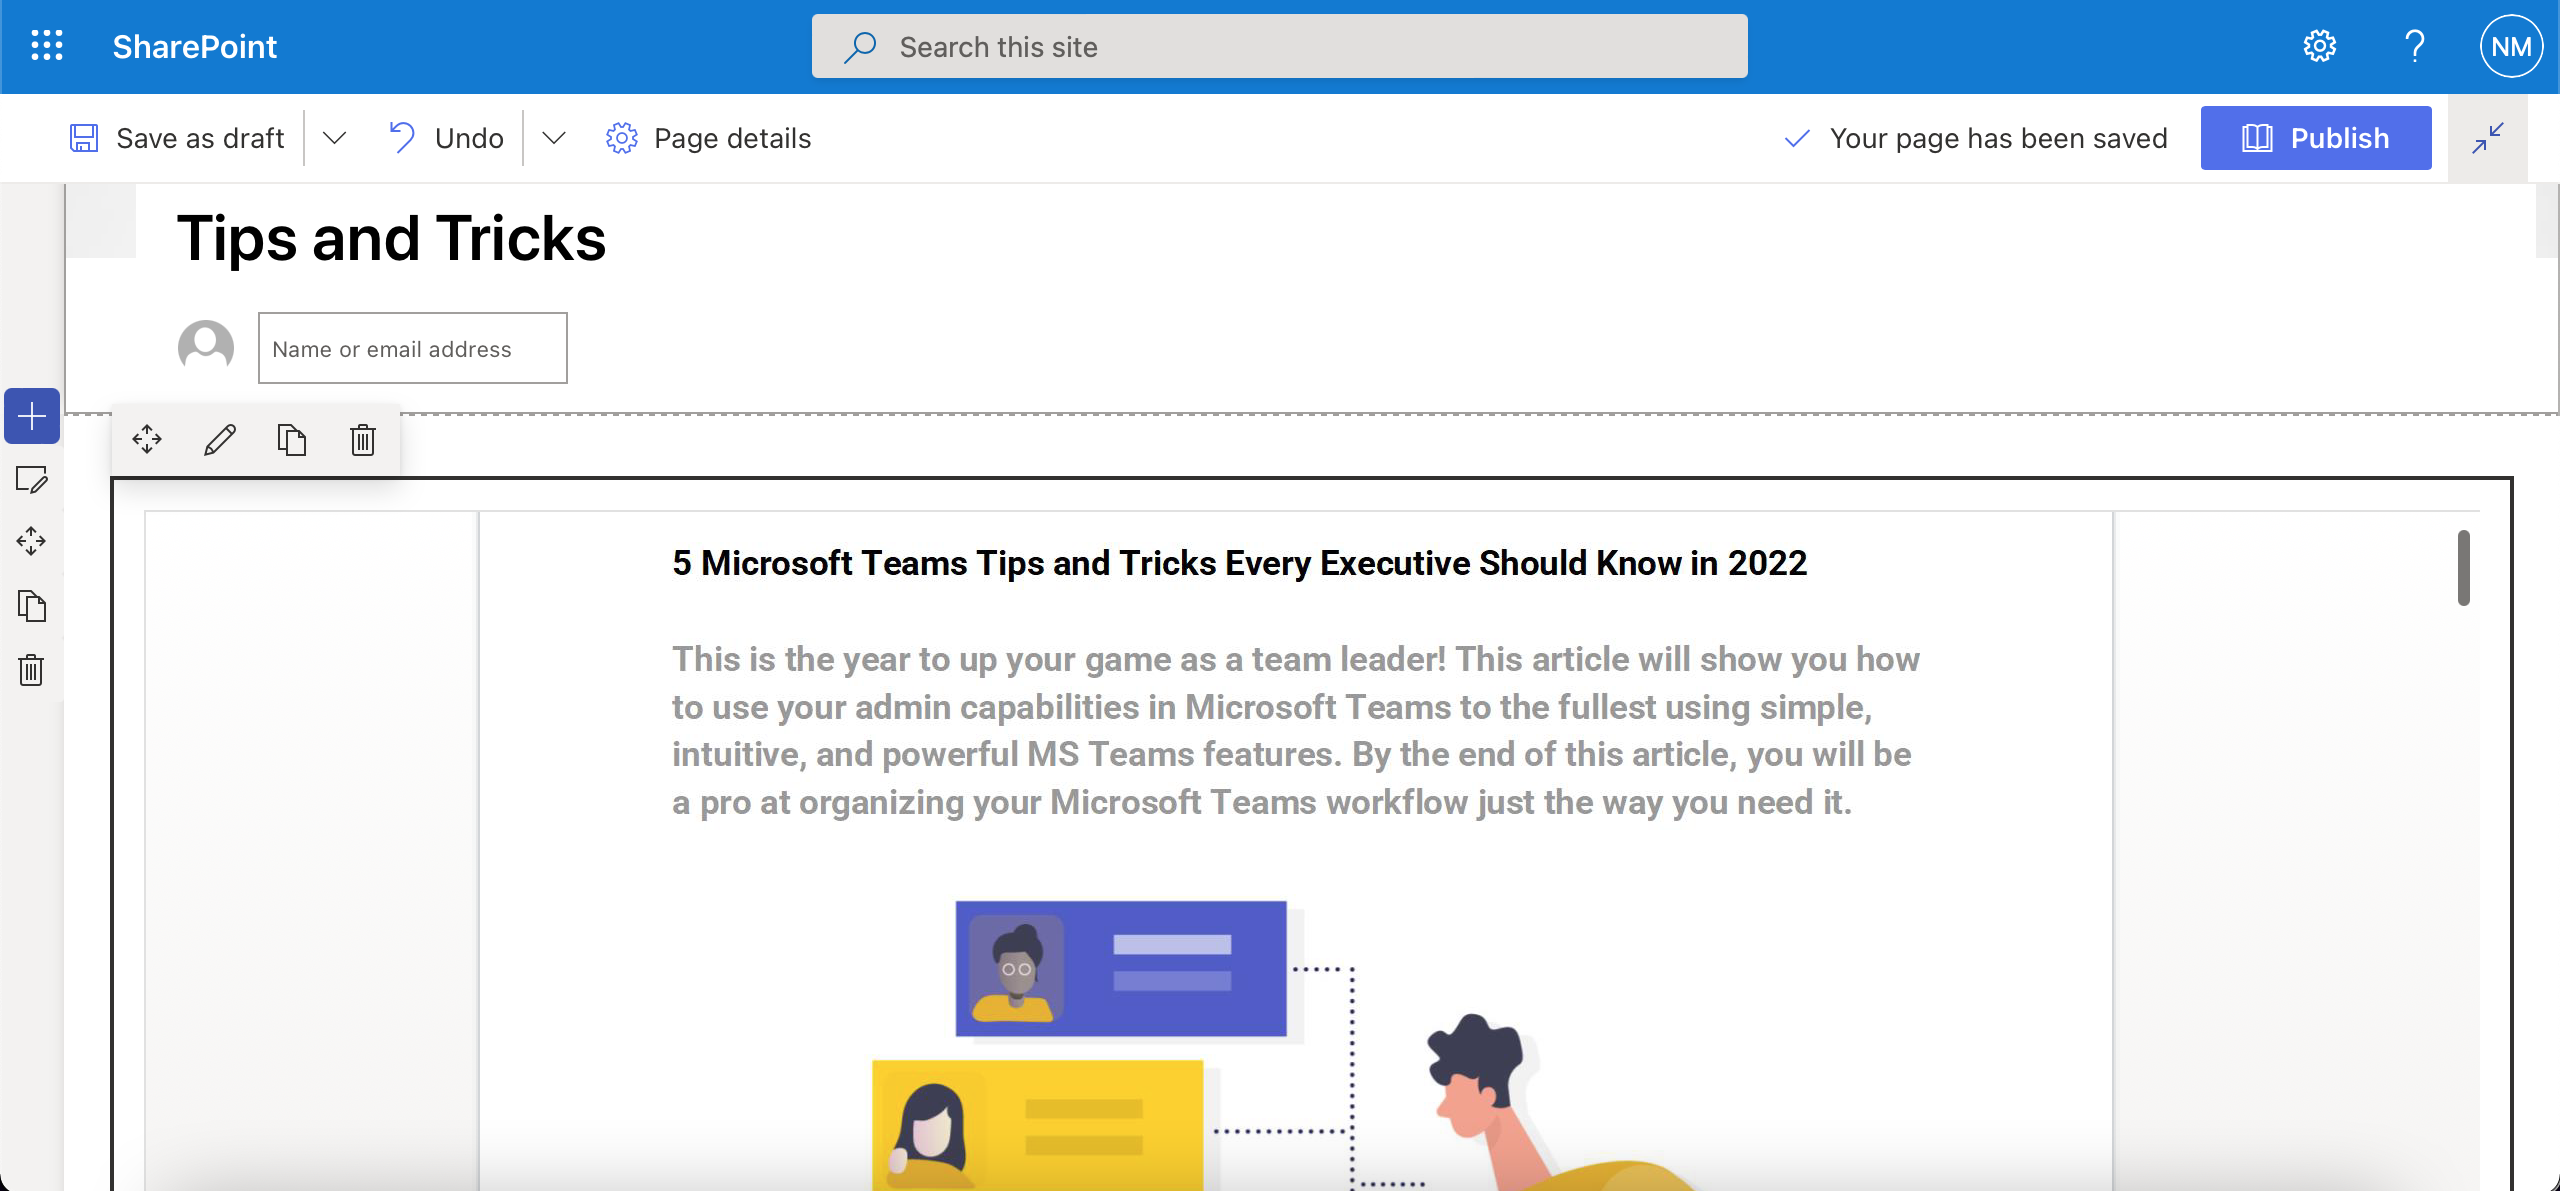 SharePoint as an MS Teams Wiki Solution? Read This First